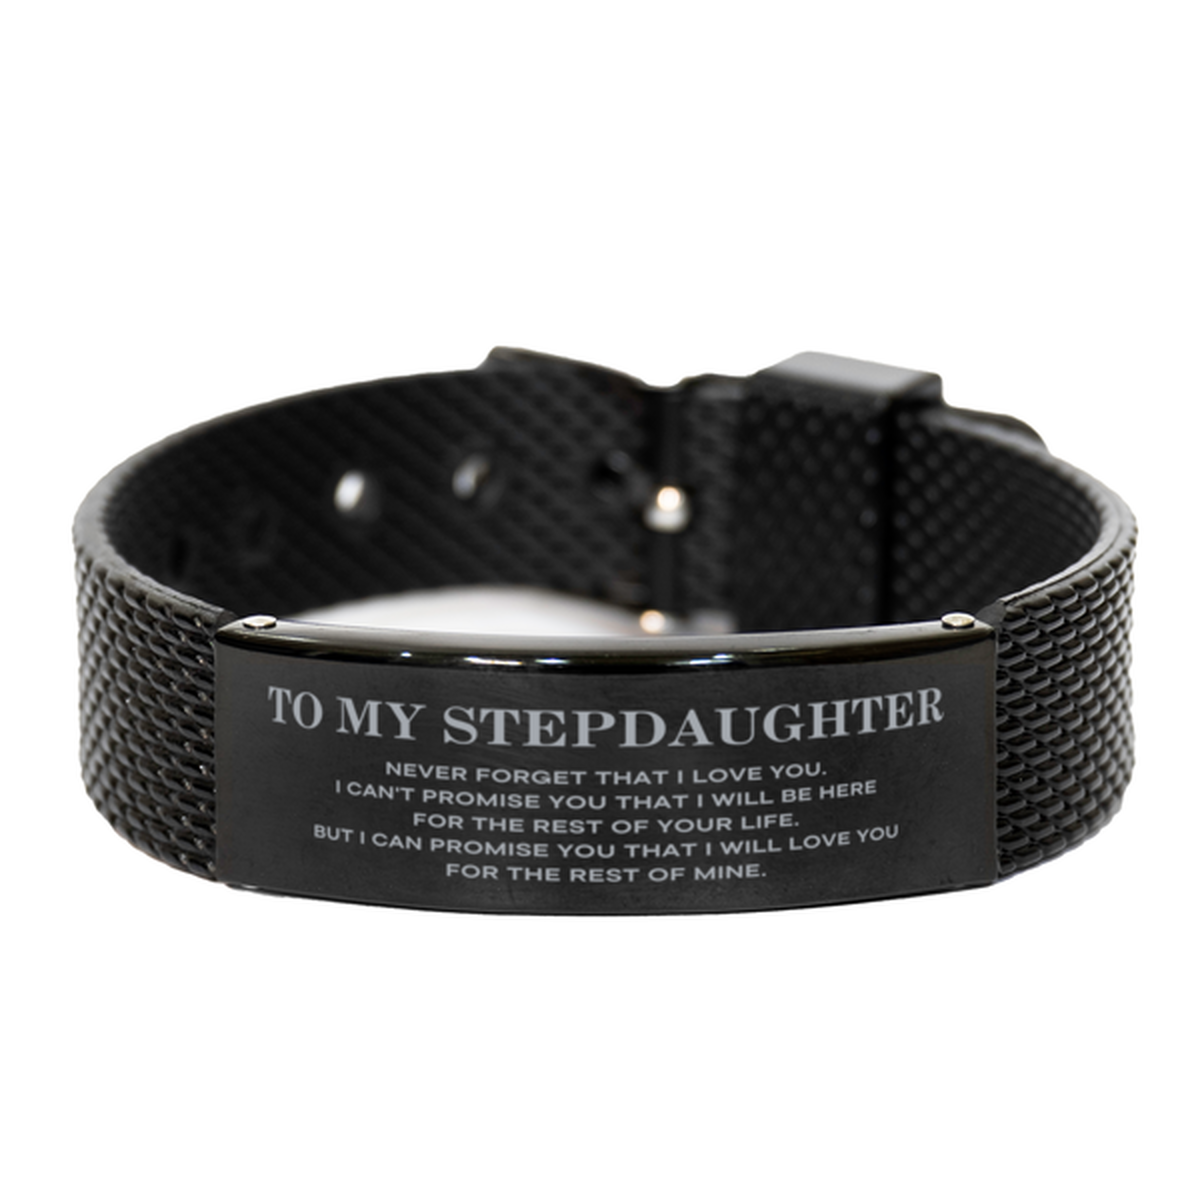 To My Stepdaughter Gifts, I will love you for the rest of mine, Love Stepdaughter Bracelet, Birthday Christmas Unique Black Shark Mesh Bracelet For Stepdaughter